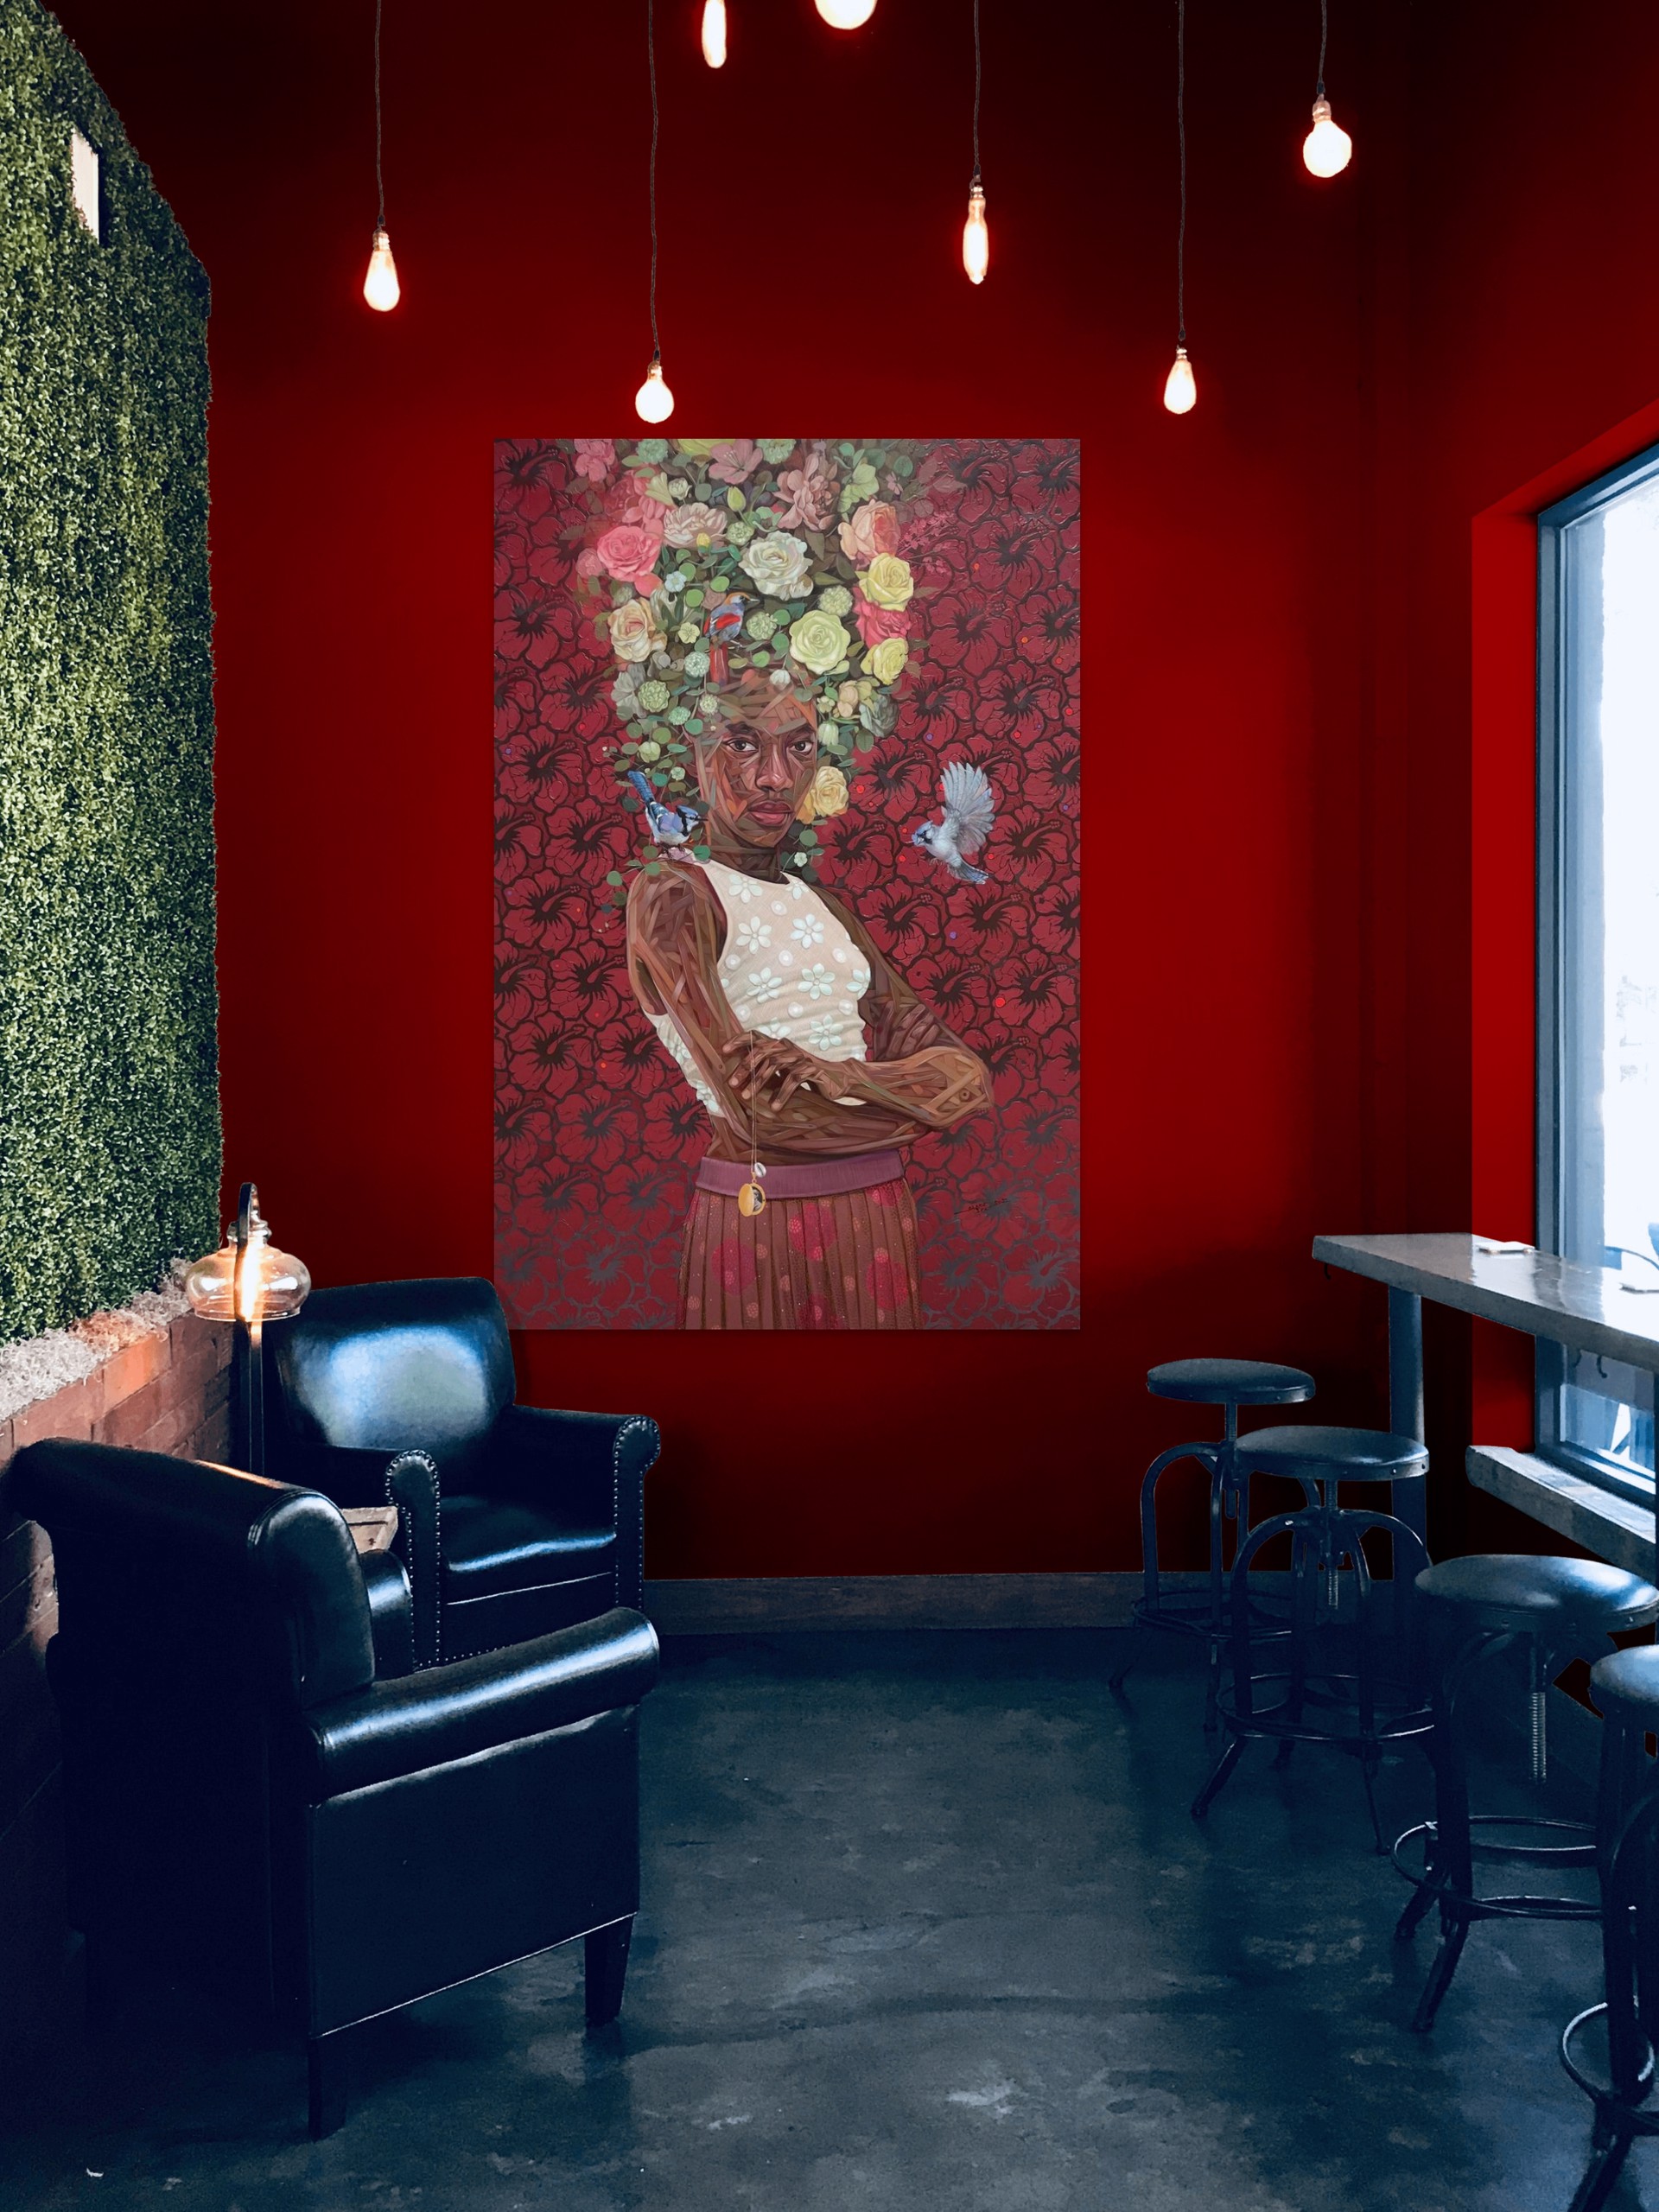 "Nest IV" by Ifeoluwa Alade, an acrylic painting on canvas featuring a woman with flowers in her hair against a red floral background, with two birds.